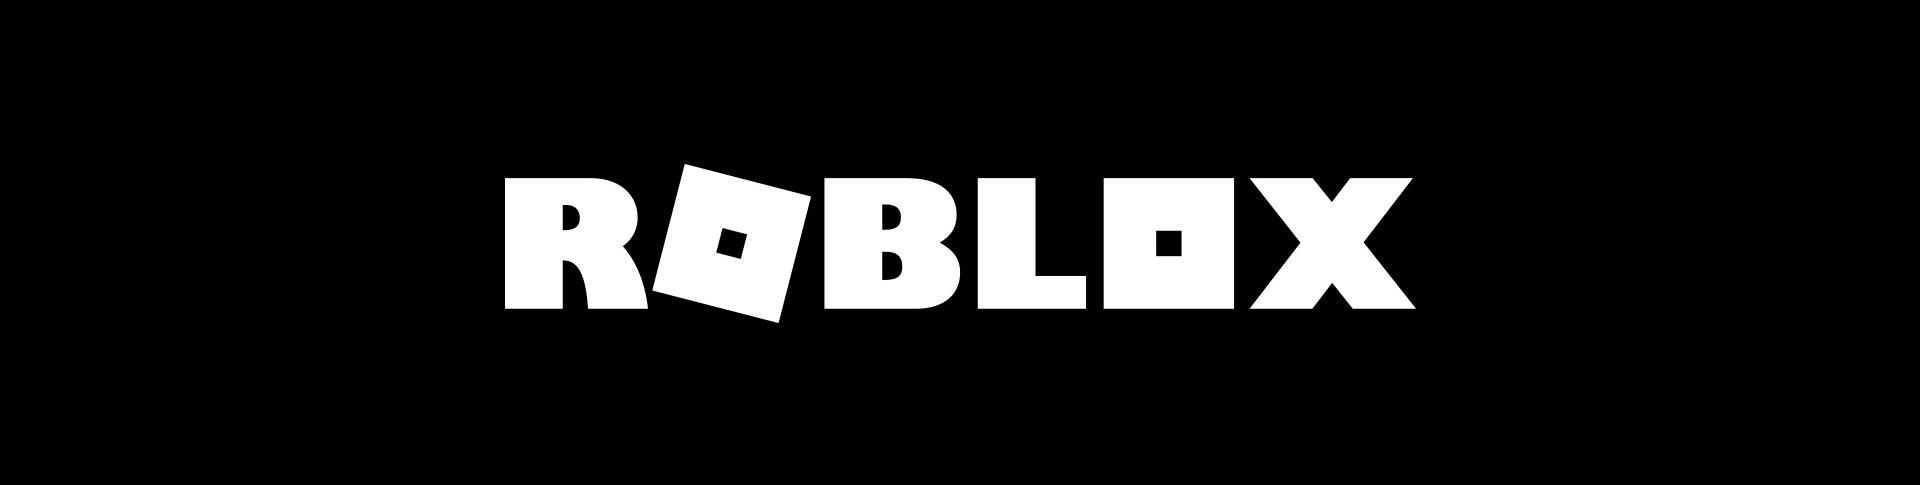 A Complete History Of The Roblox Logo Pocket Tactics - what does the roblox logo look like